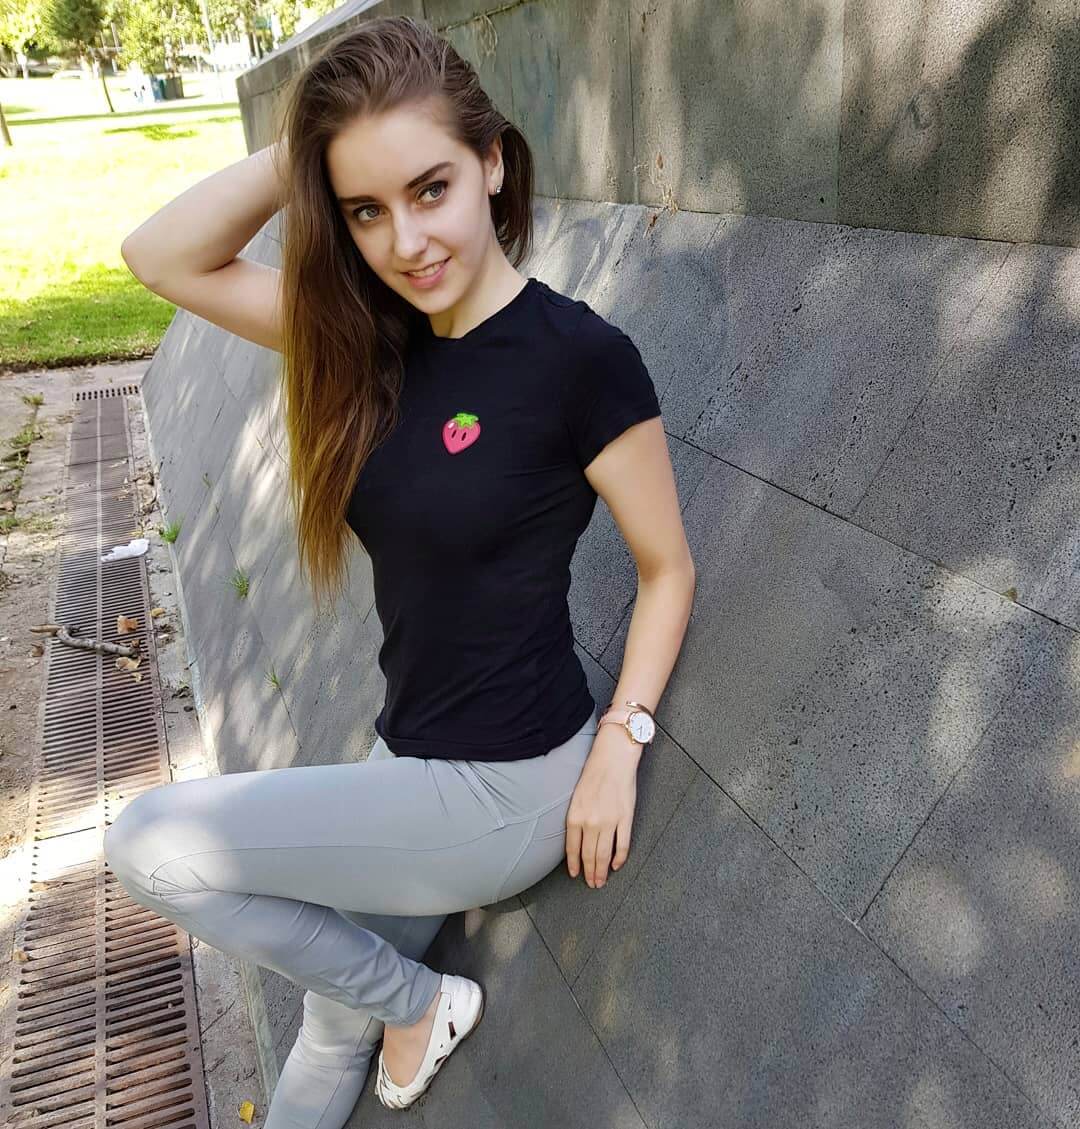 70+ Loserfruit Hot Pictures Are Too Much For You To Handle 27